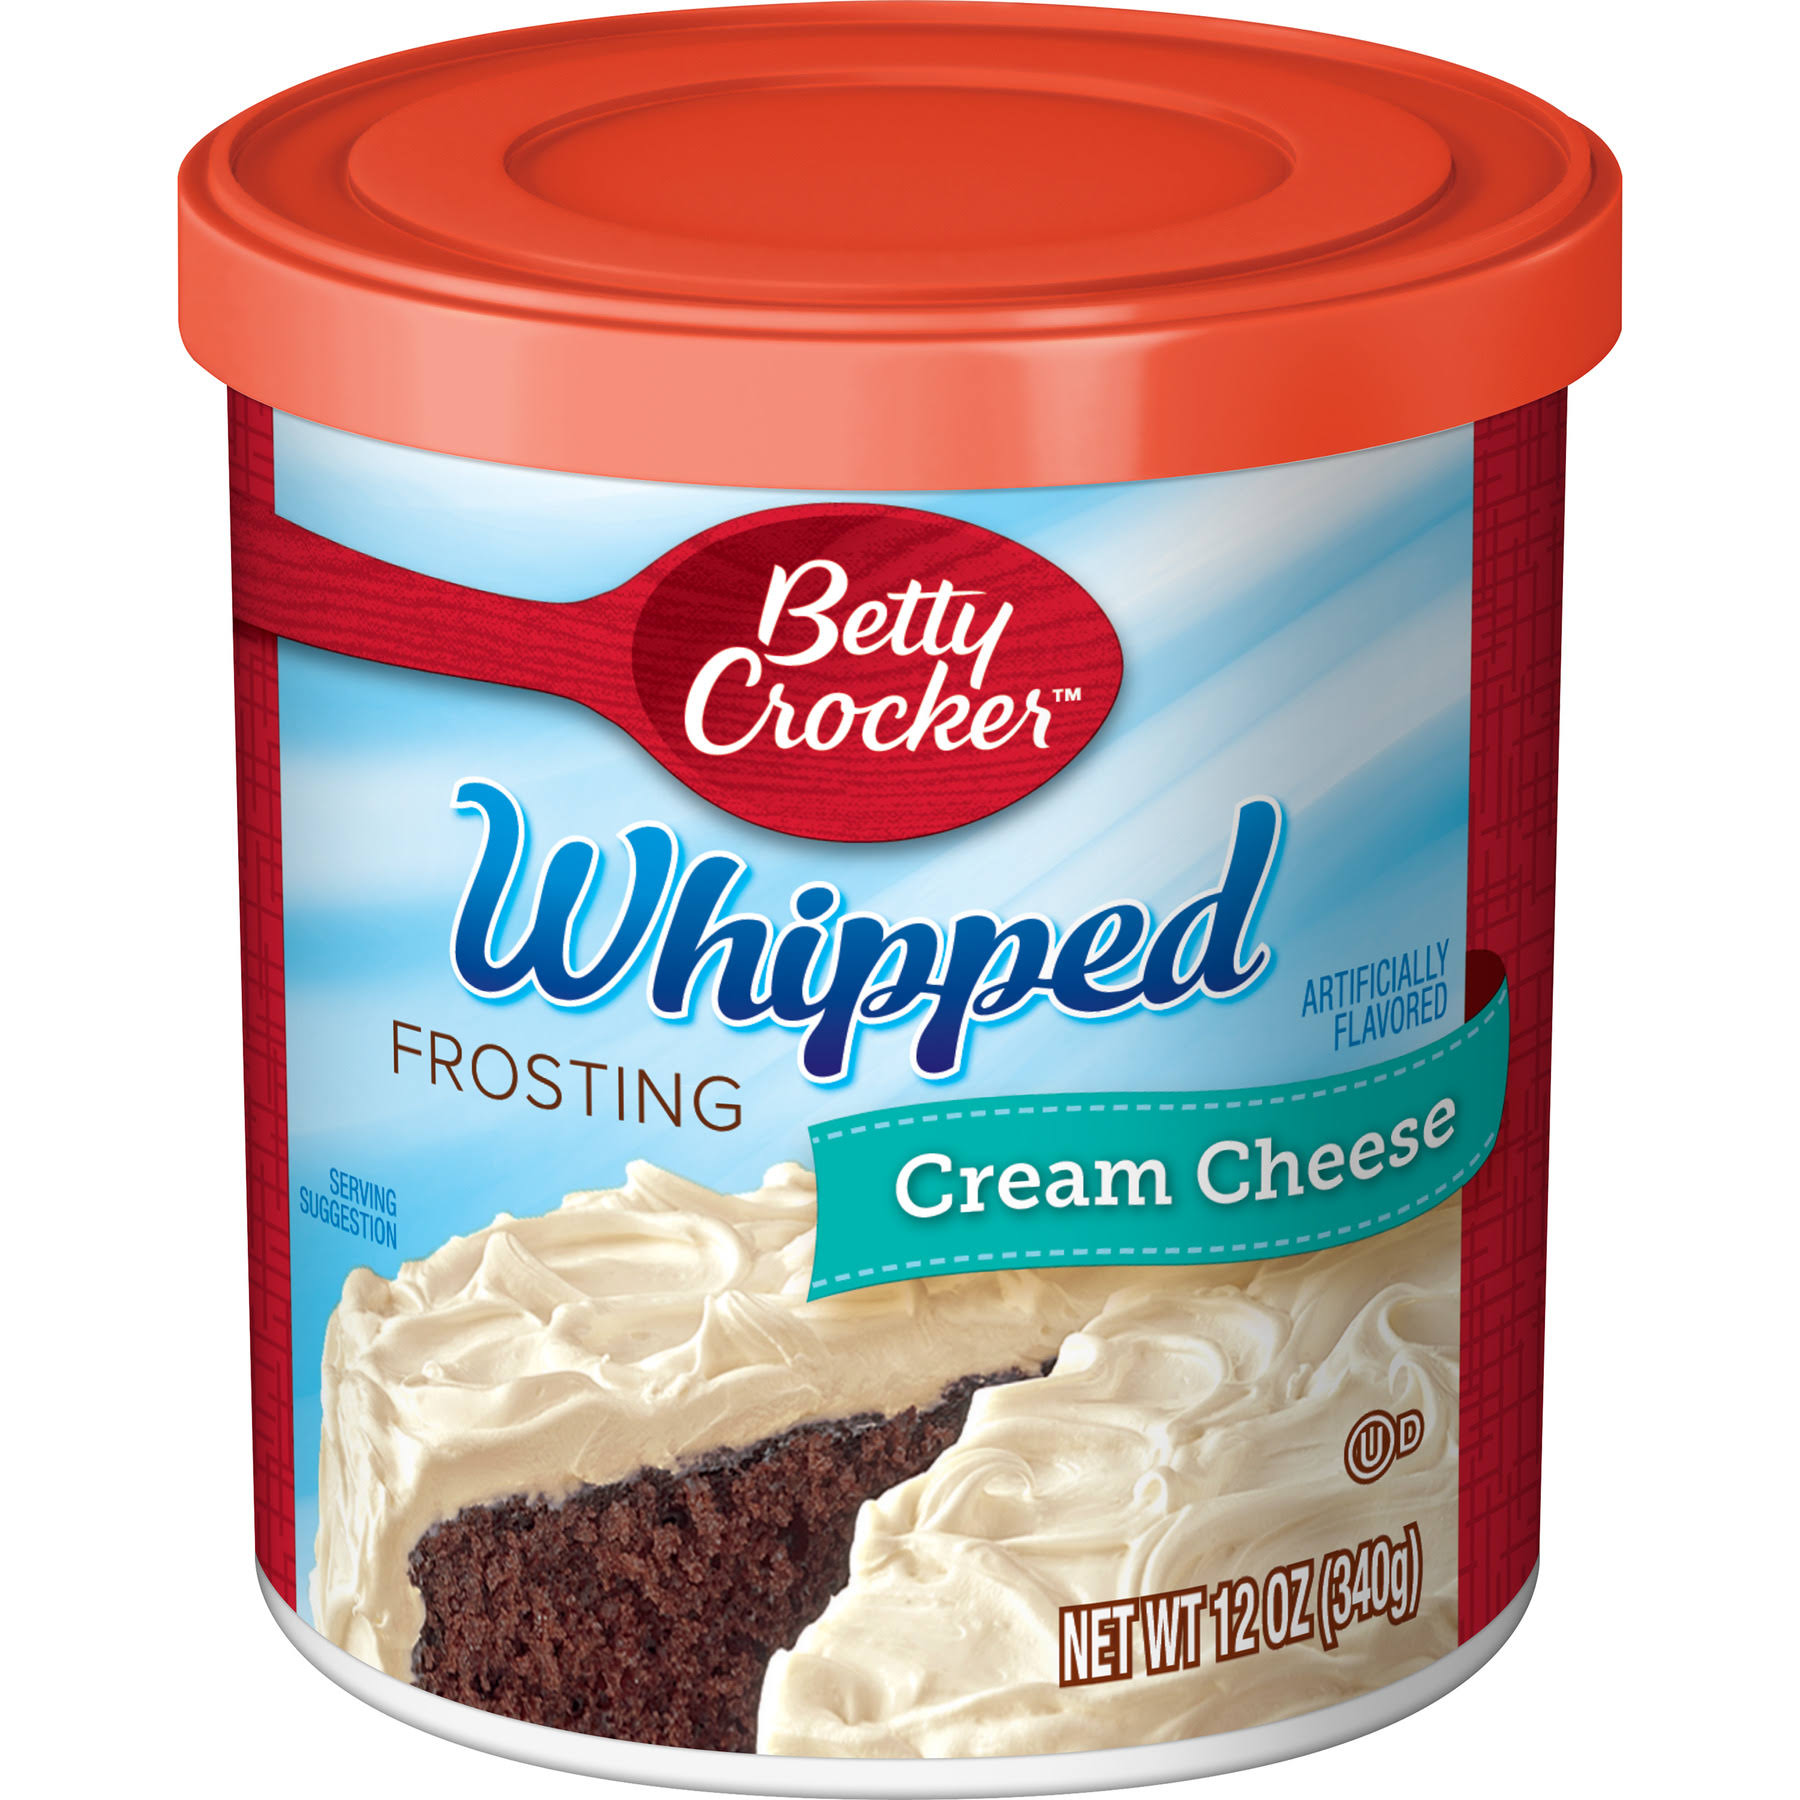 Betty Crocker Whipped Frosting - Cream Cheese, 12oz